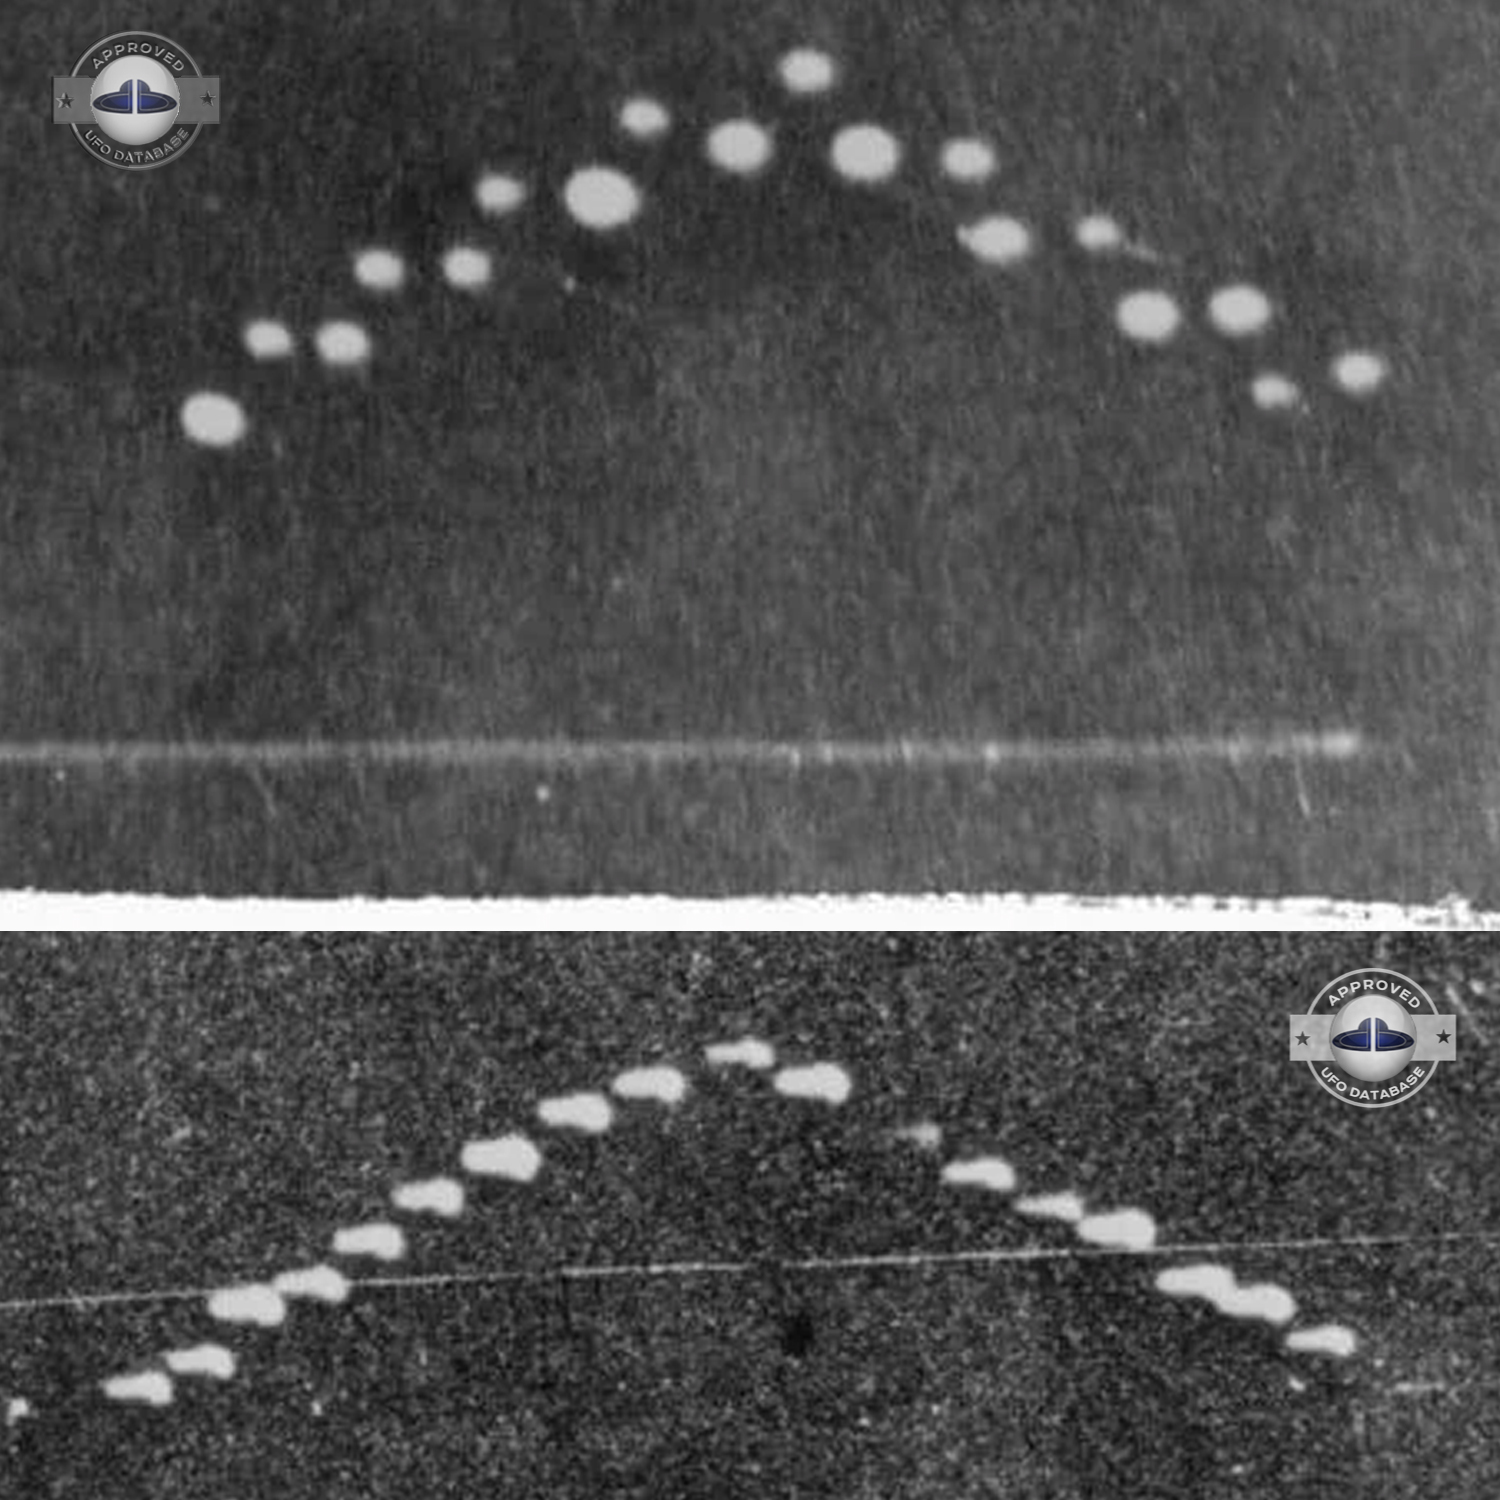 UFO picture show 18 luminous UFO arranged in a crescent formation UFO Picture #117-8